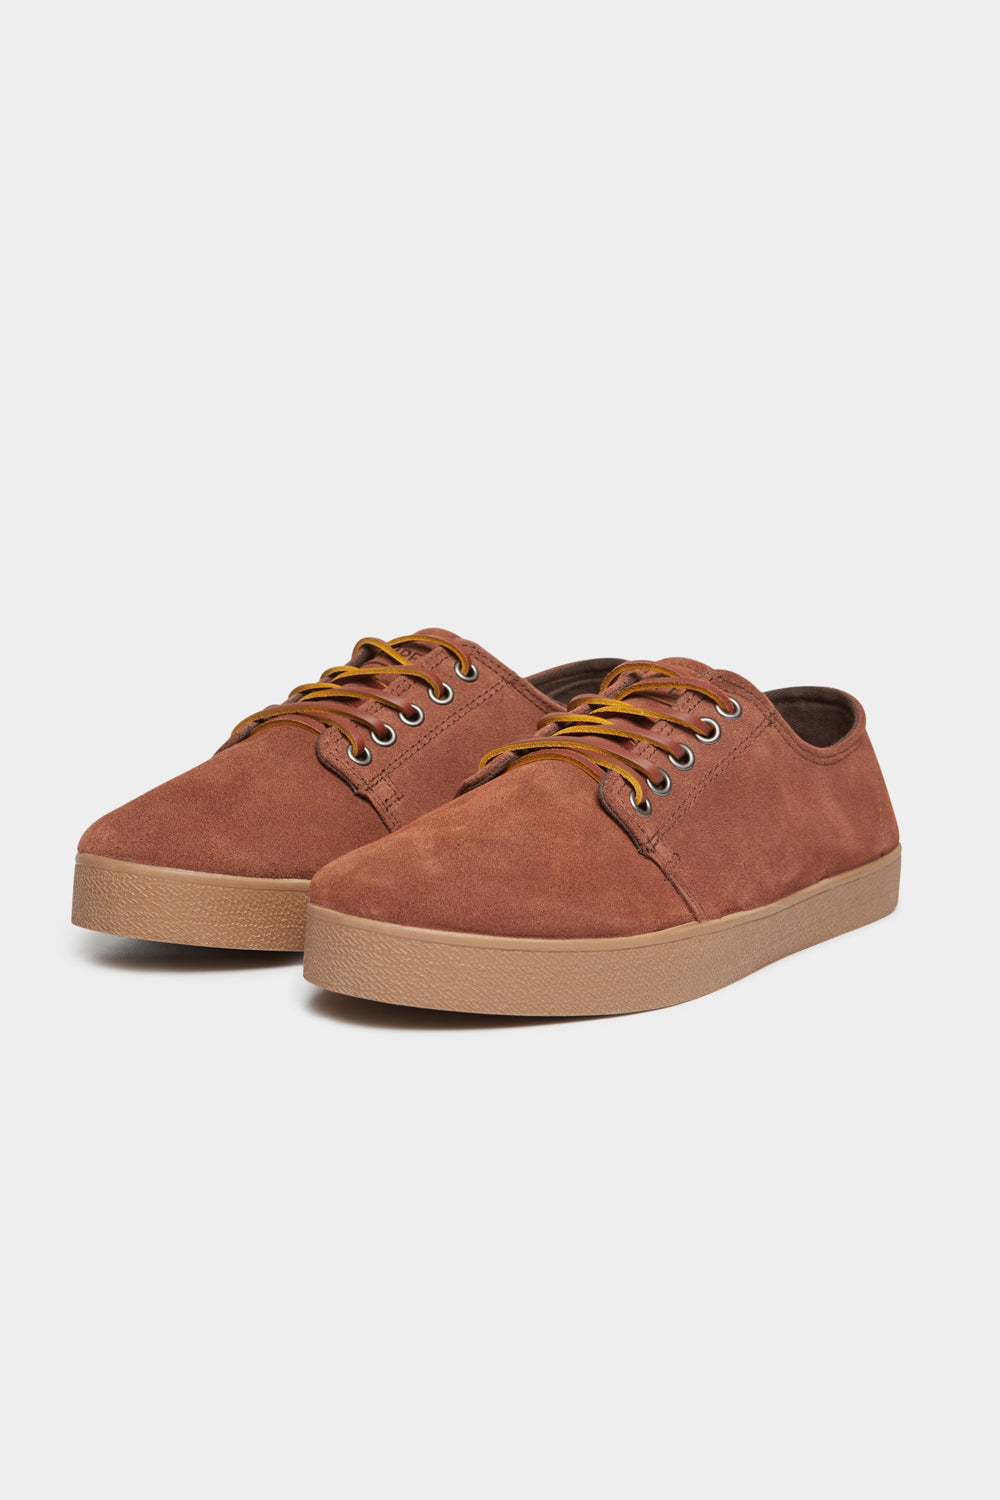 HIGBY SUEDE HYDRO REDWOOD TAUPE